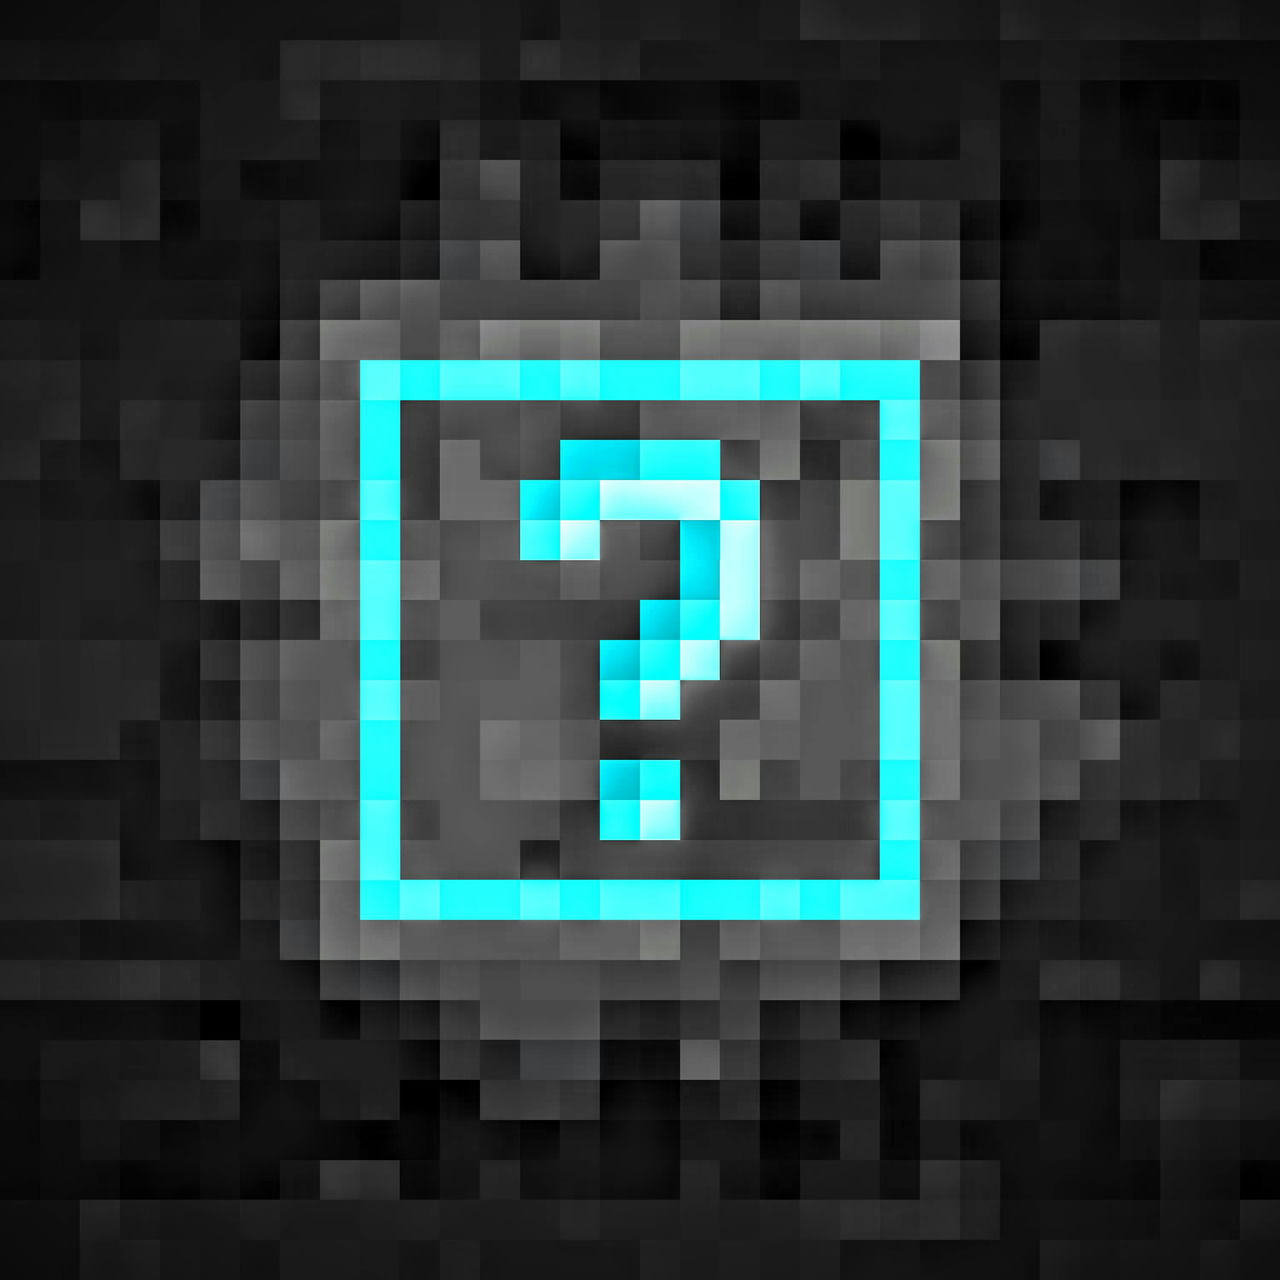 A square pixelated blue question mark